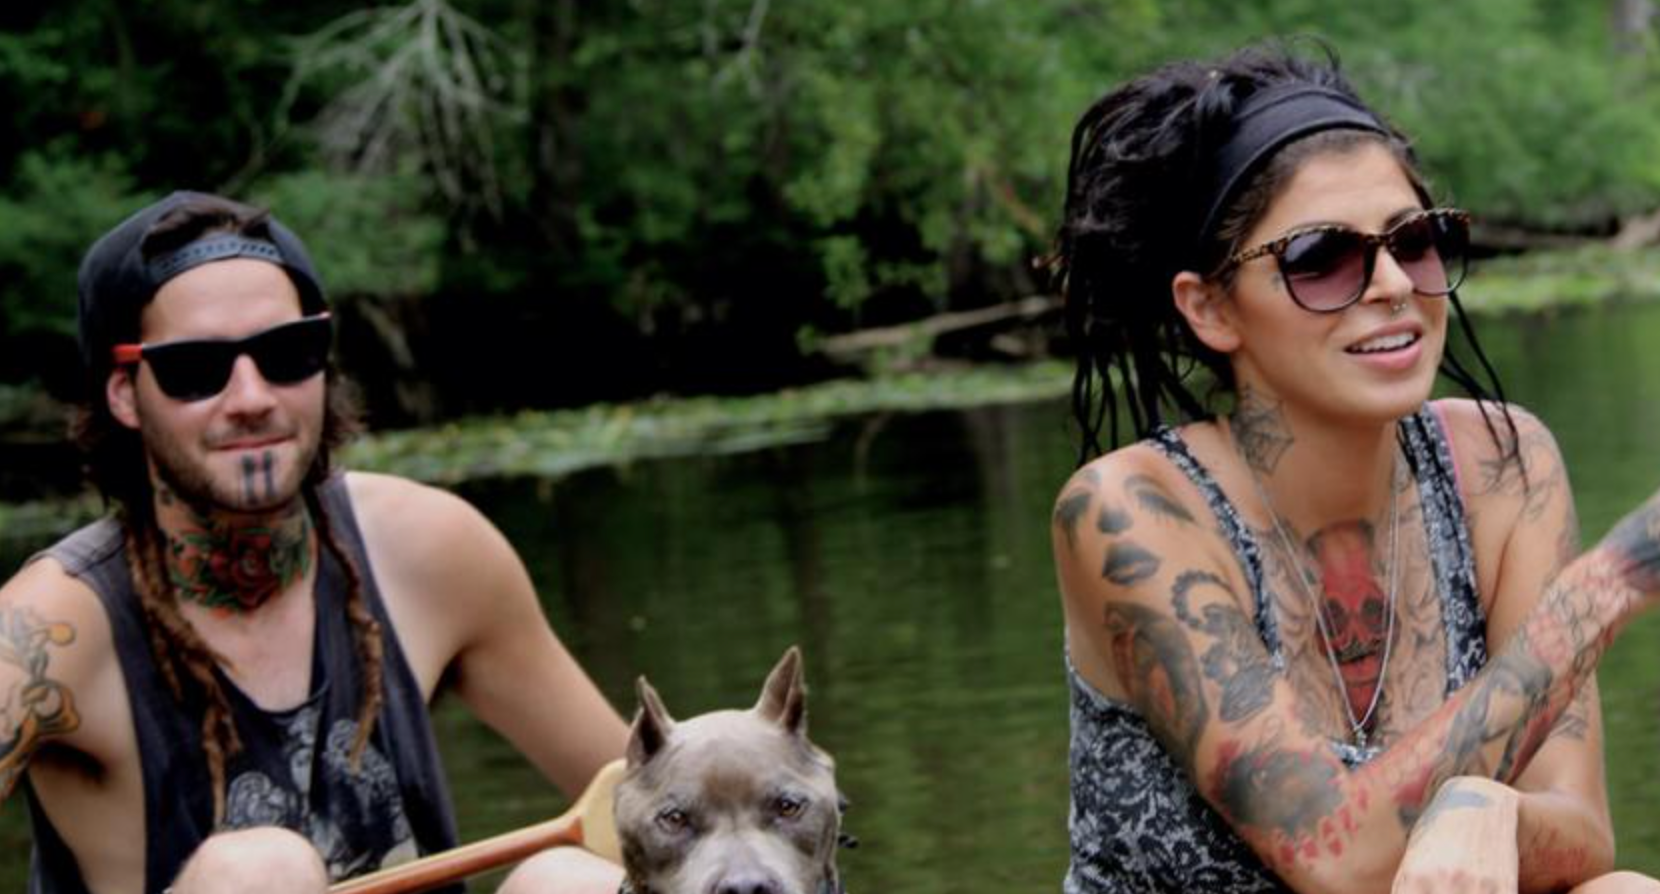 Tania and Perry from 'Pit Bulls and Parolees'